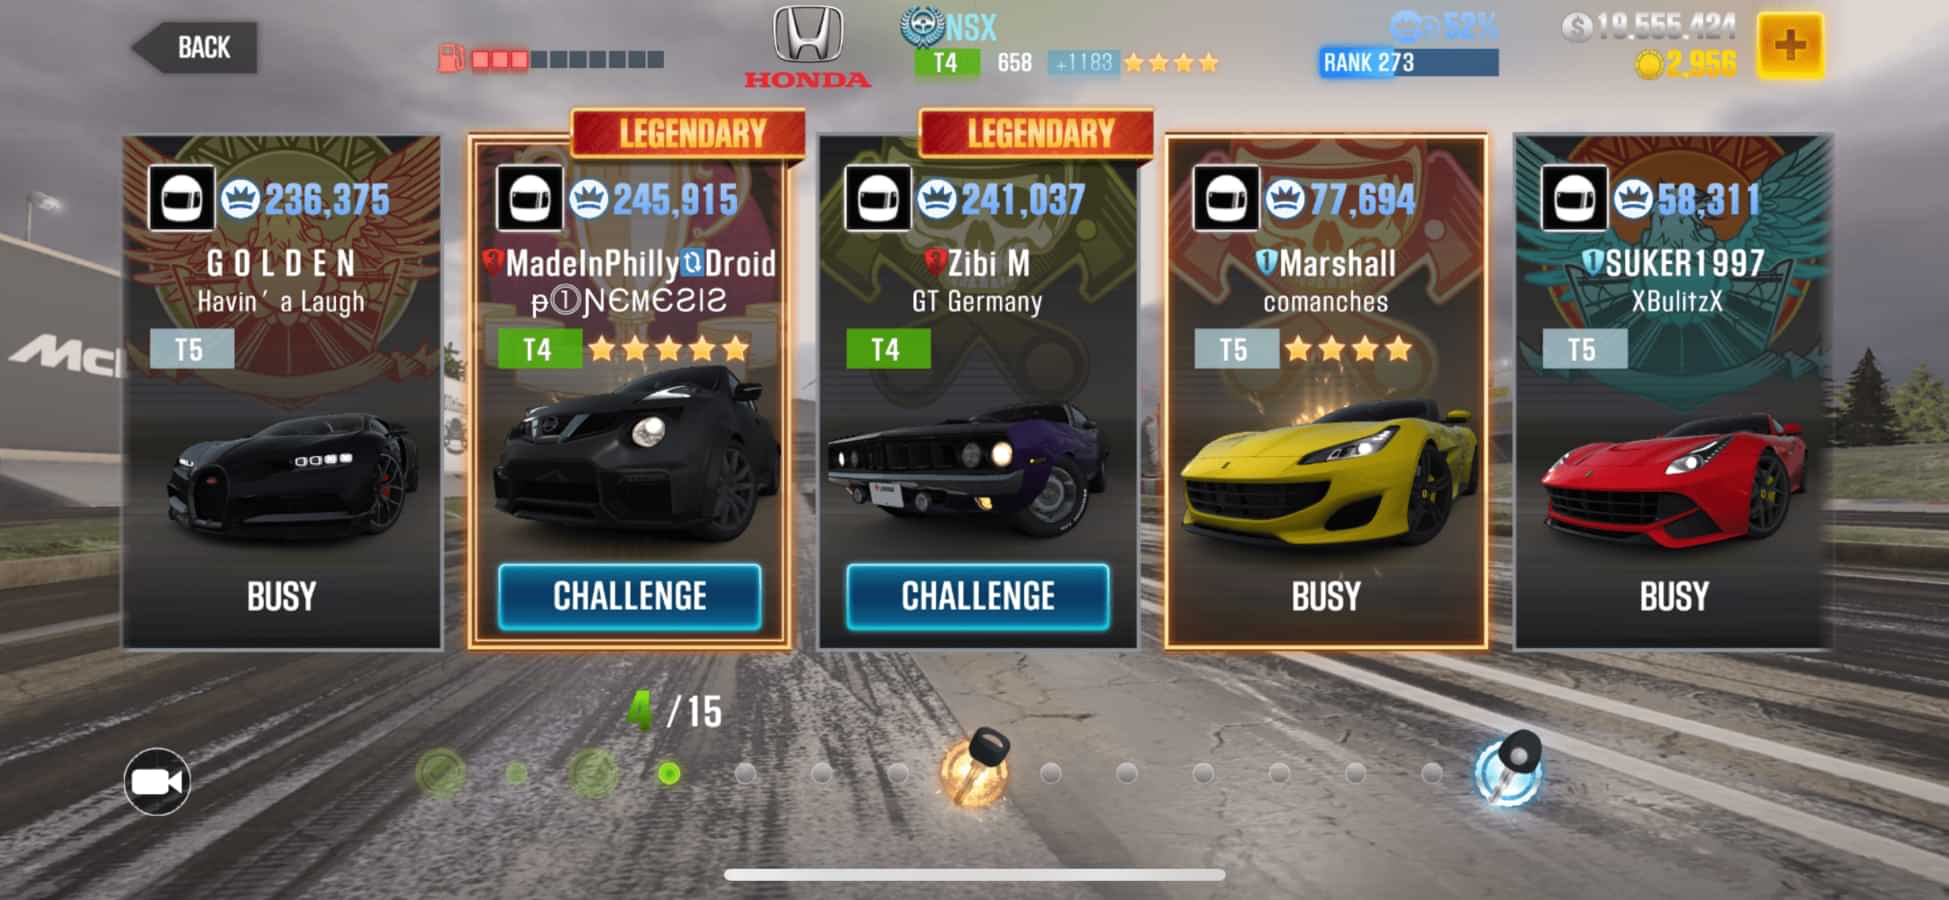 Live Races, Lobby Times, Swapping and W/L in CSR2